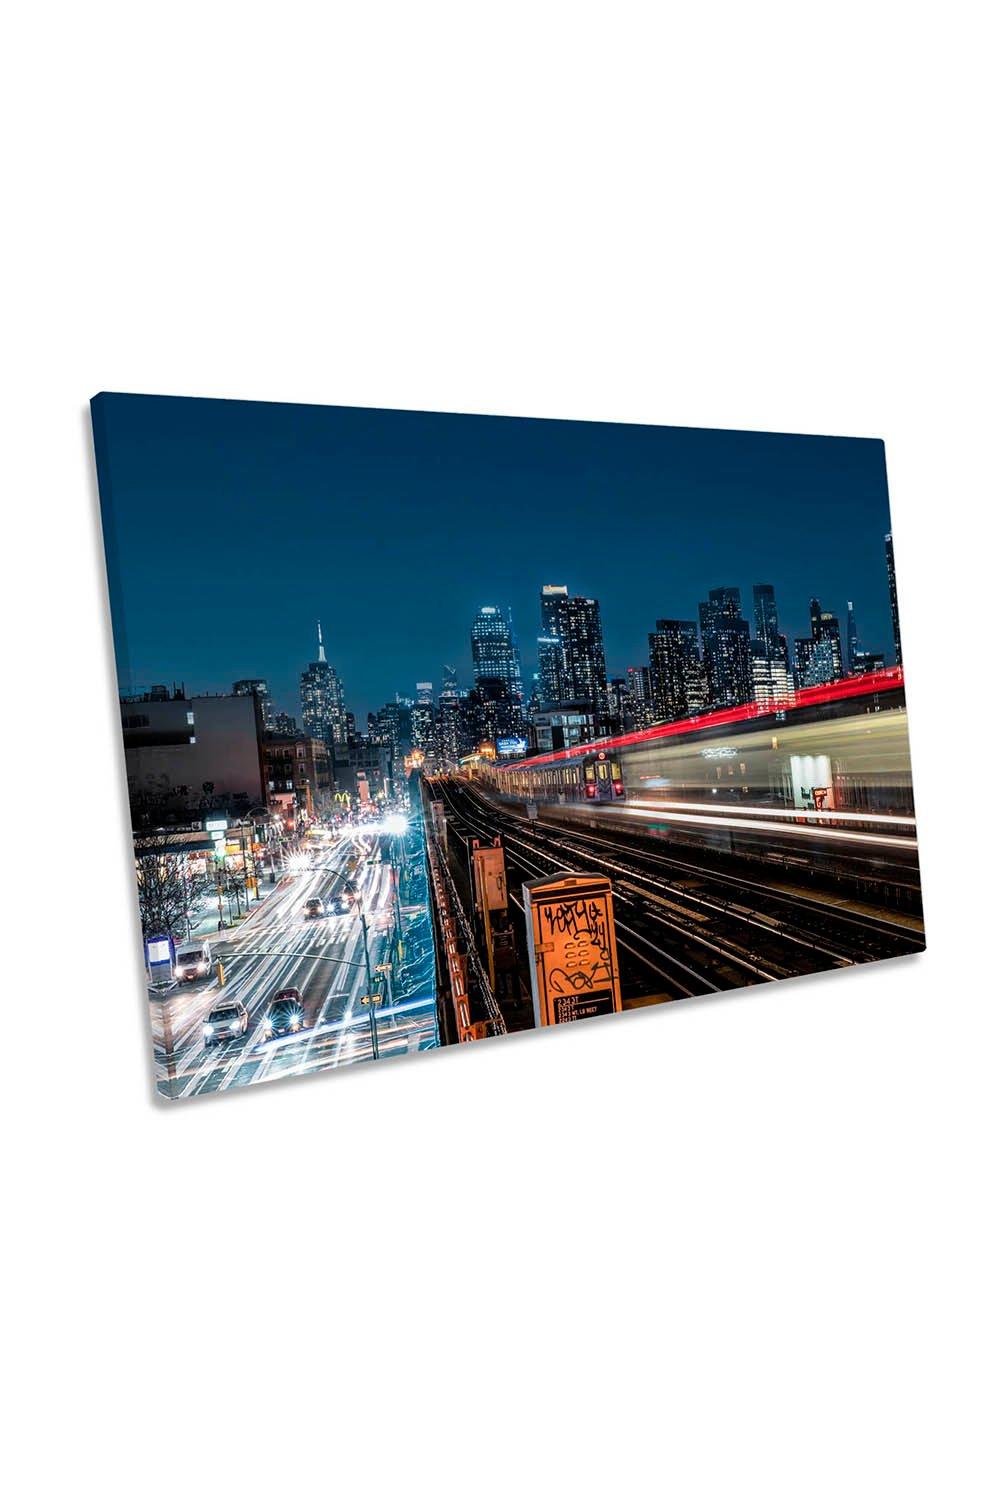 NYC Subway New York City Canvas Wall Art Picture Print